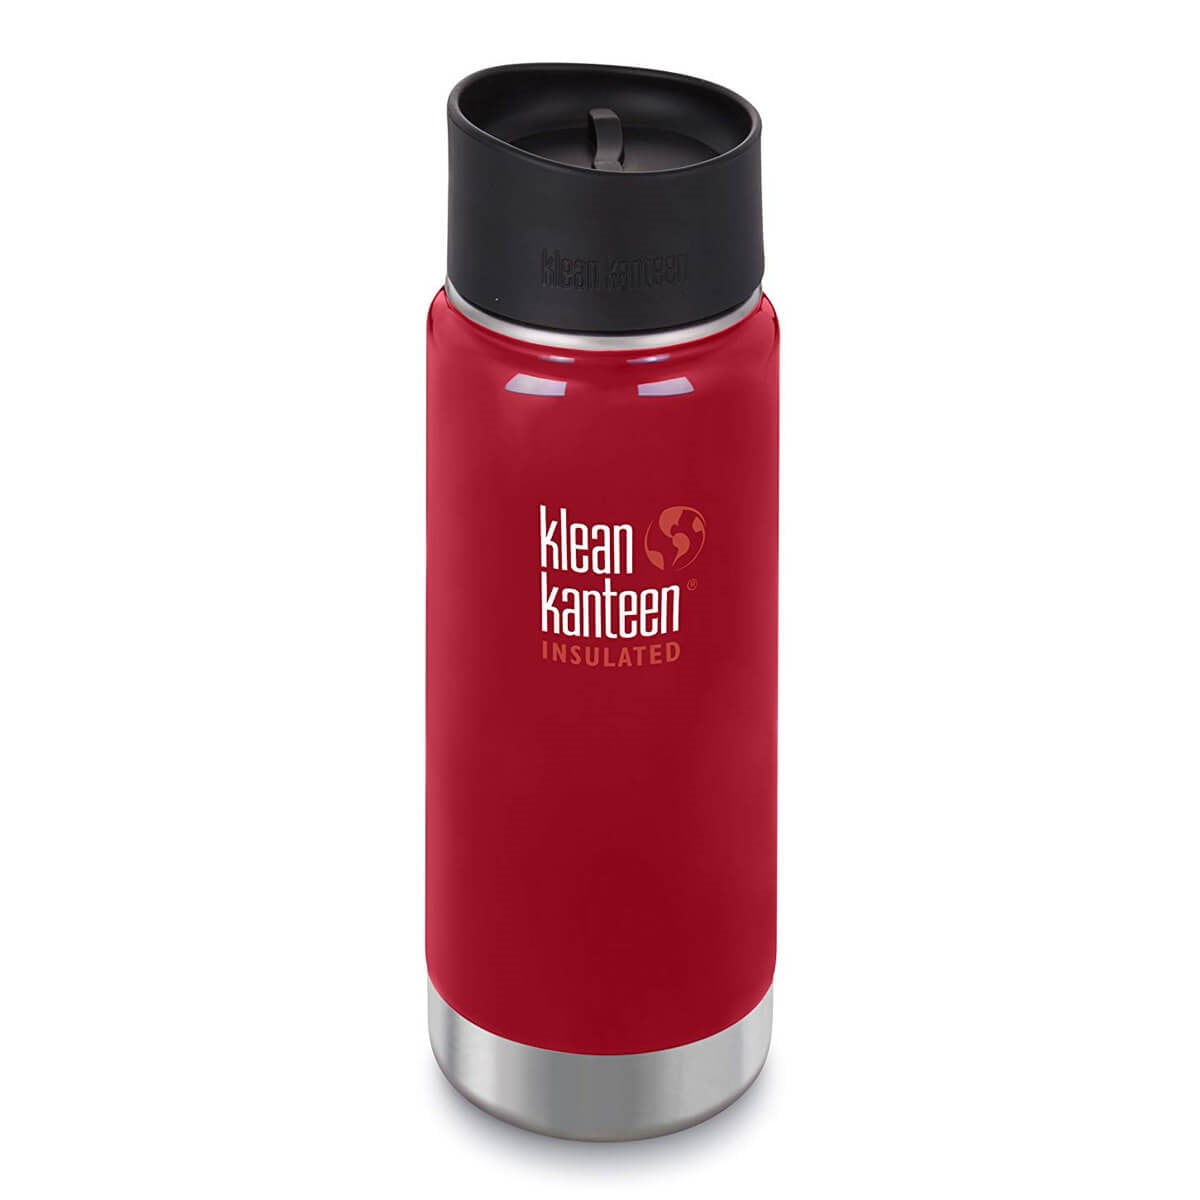 klean kanteen wide double wall vacuum insulated stainless steel coffee mug with leak proof café cap 2.0